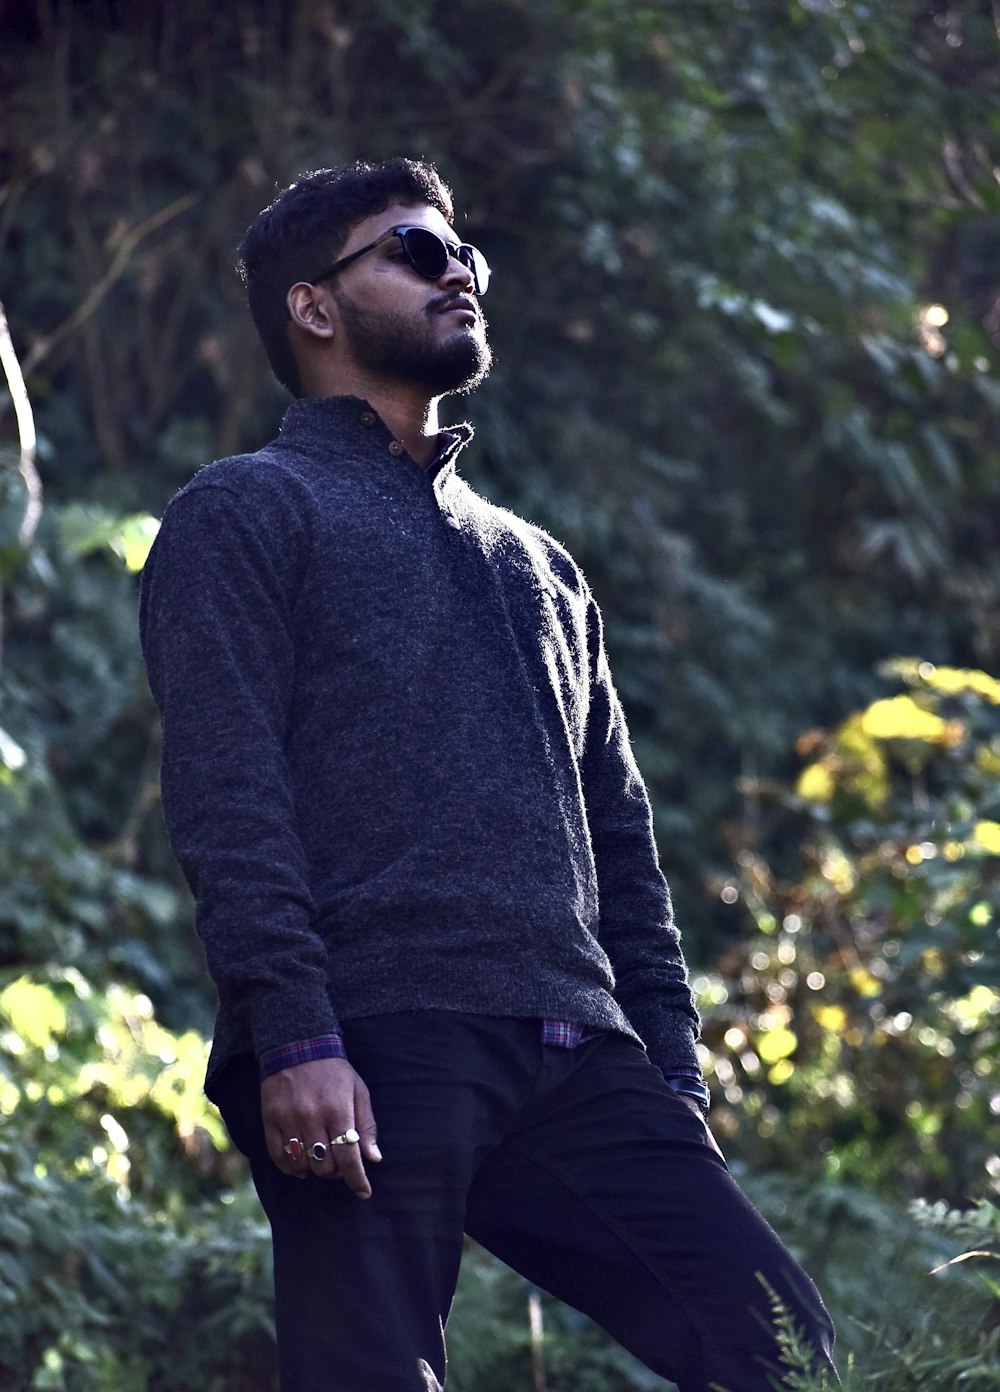 man in gray sweater and black pants wearing black sunglasses standing near green trees during daytime